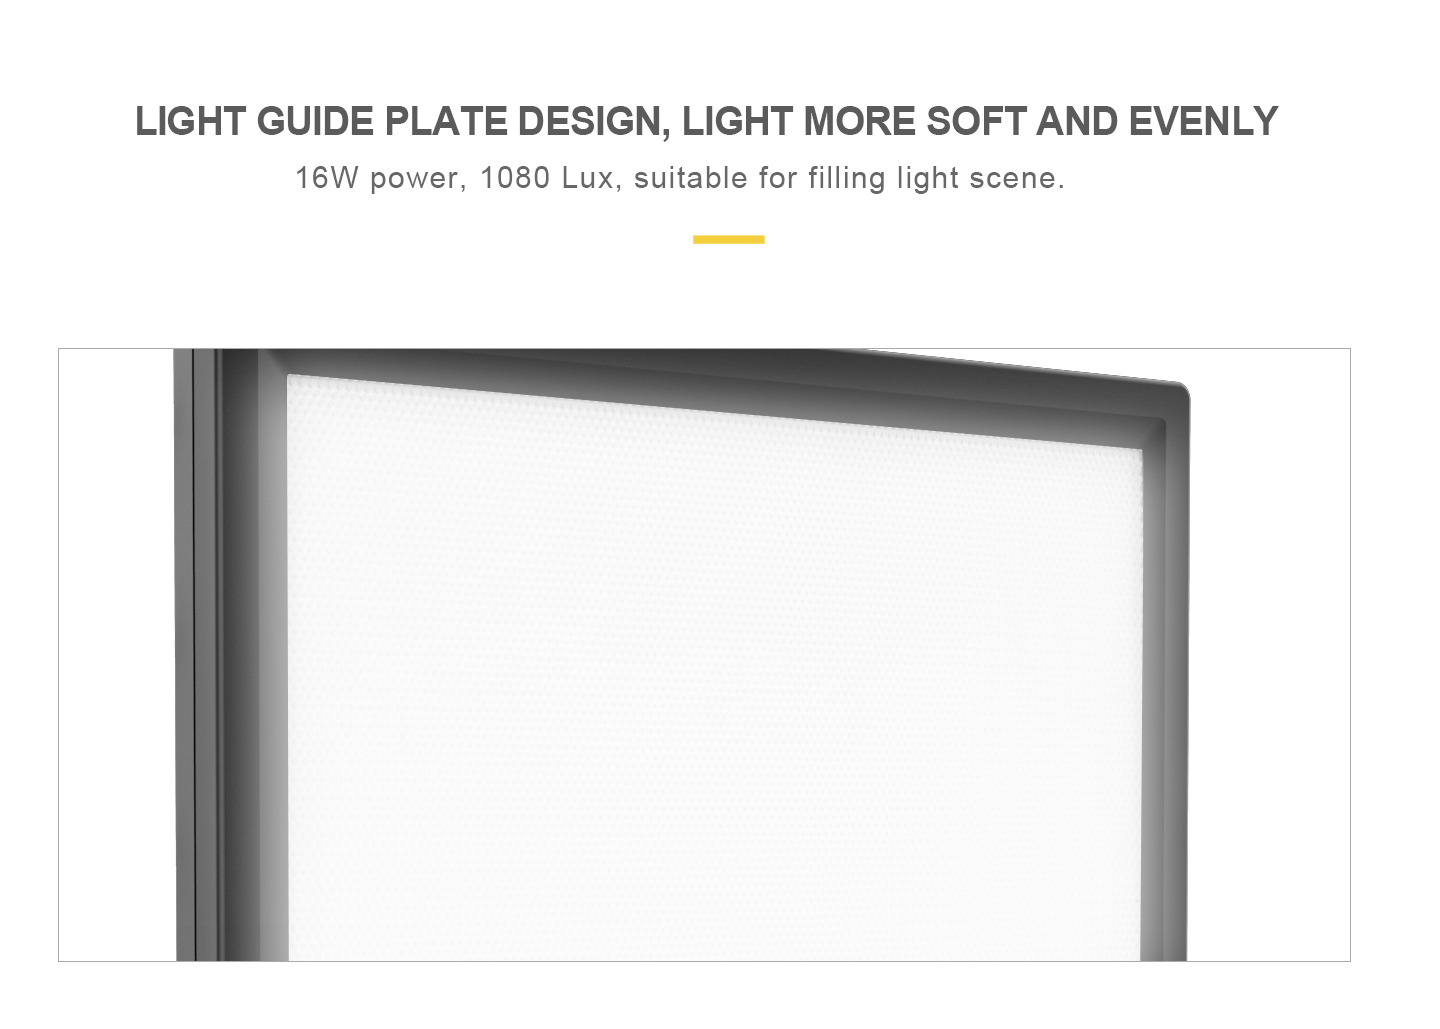 LIGHT GUIDE PLATE DESIGN, LIGHT MORE SOFT AND EVENLY